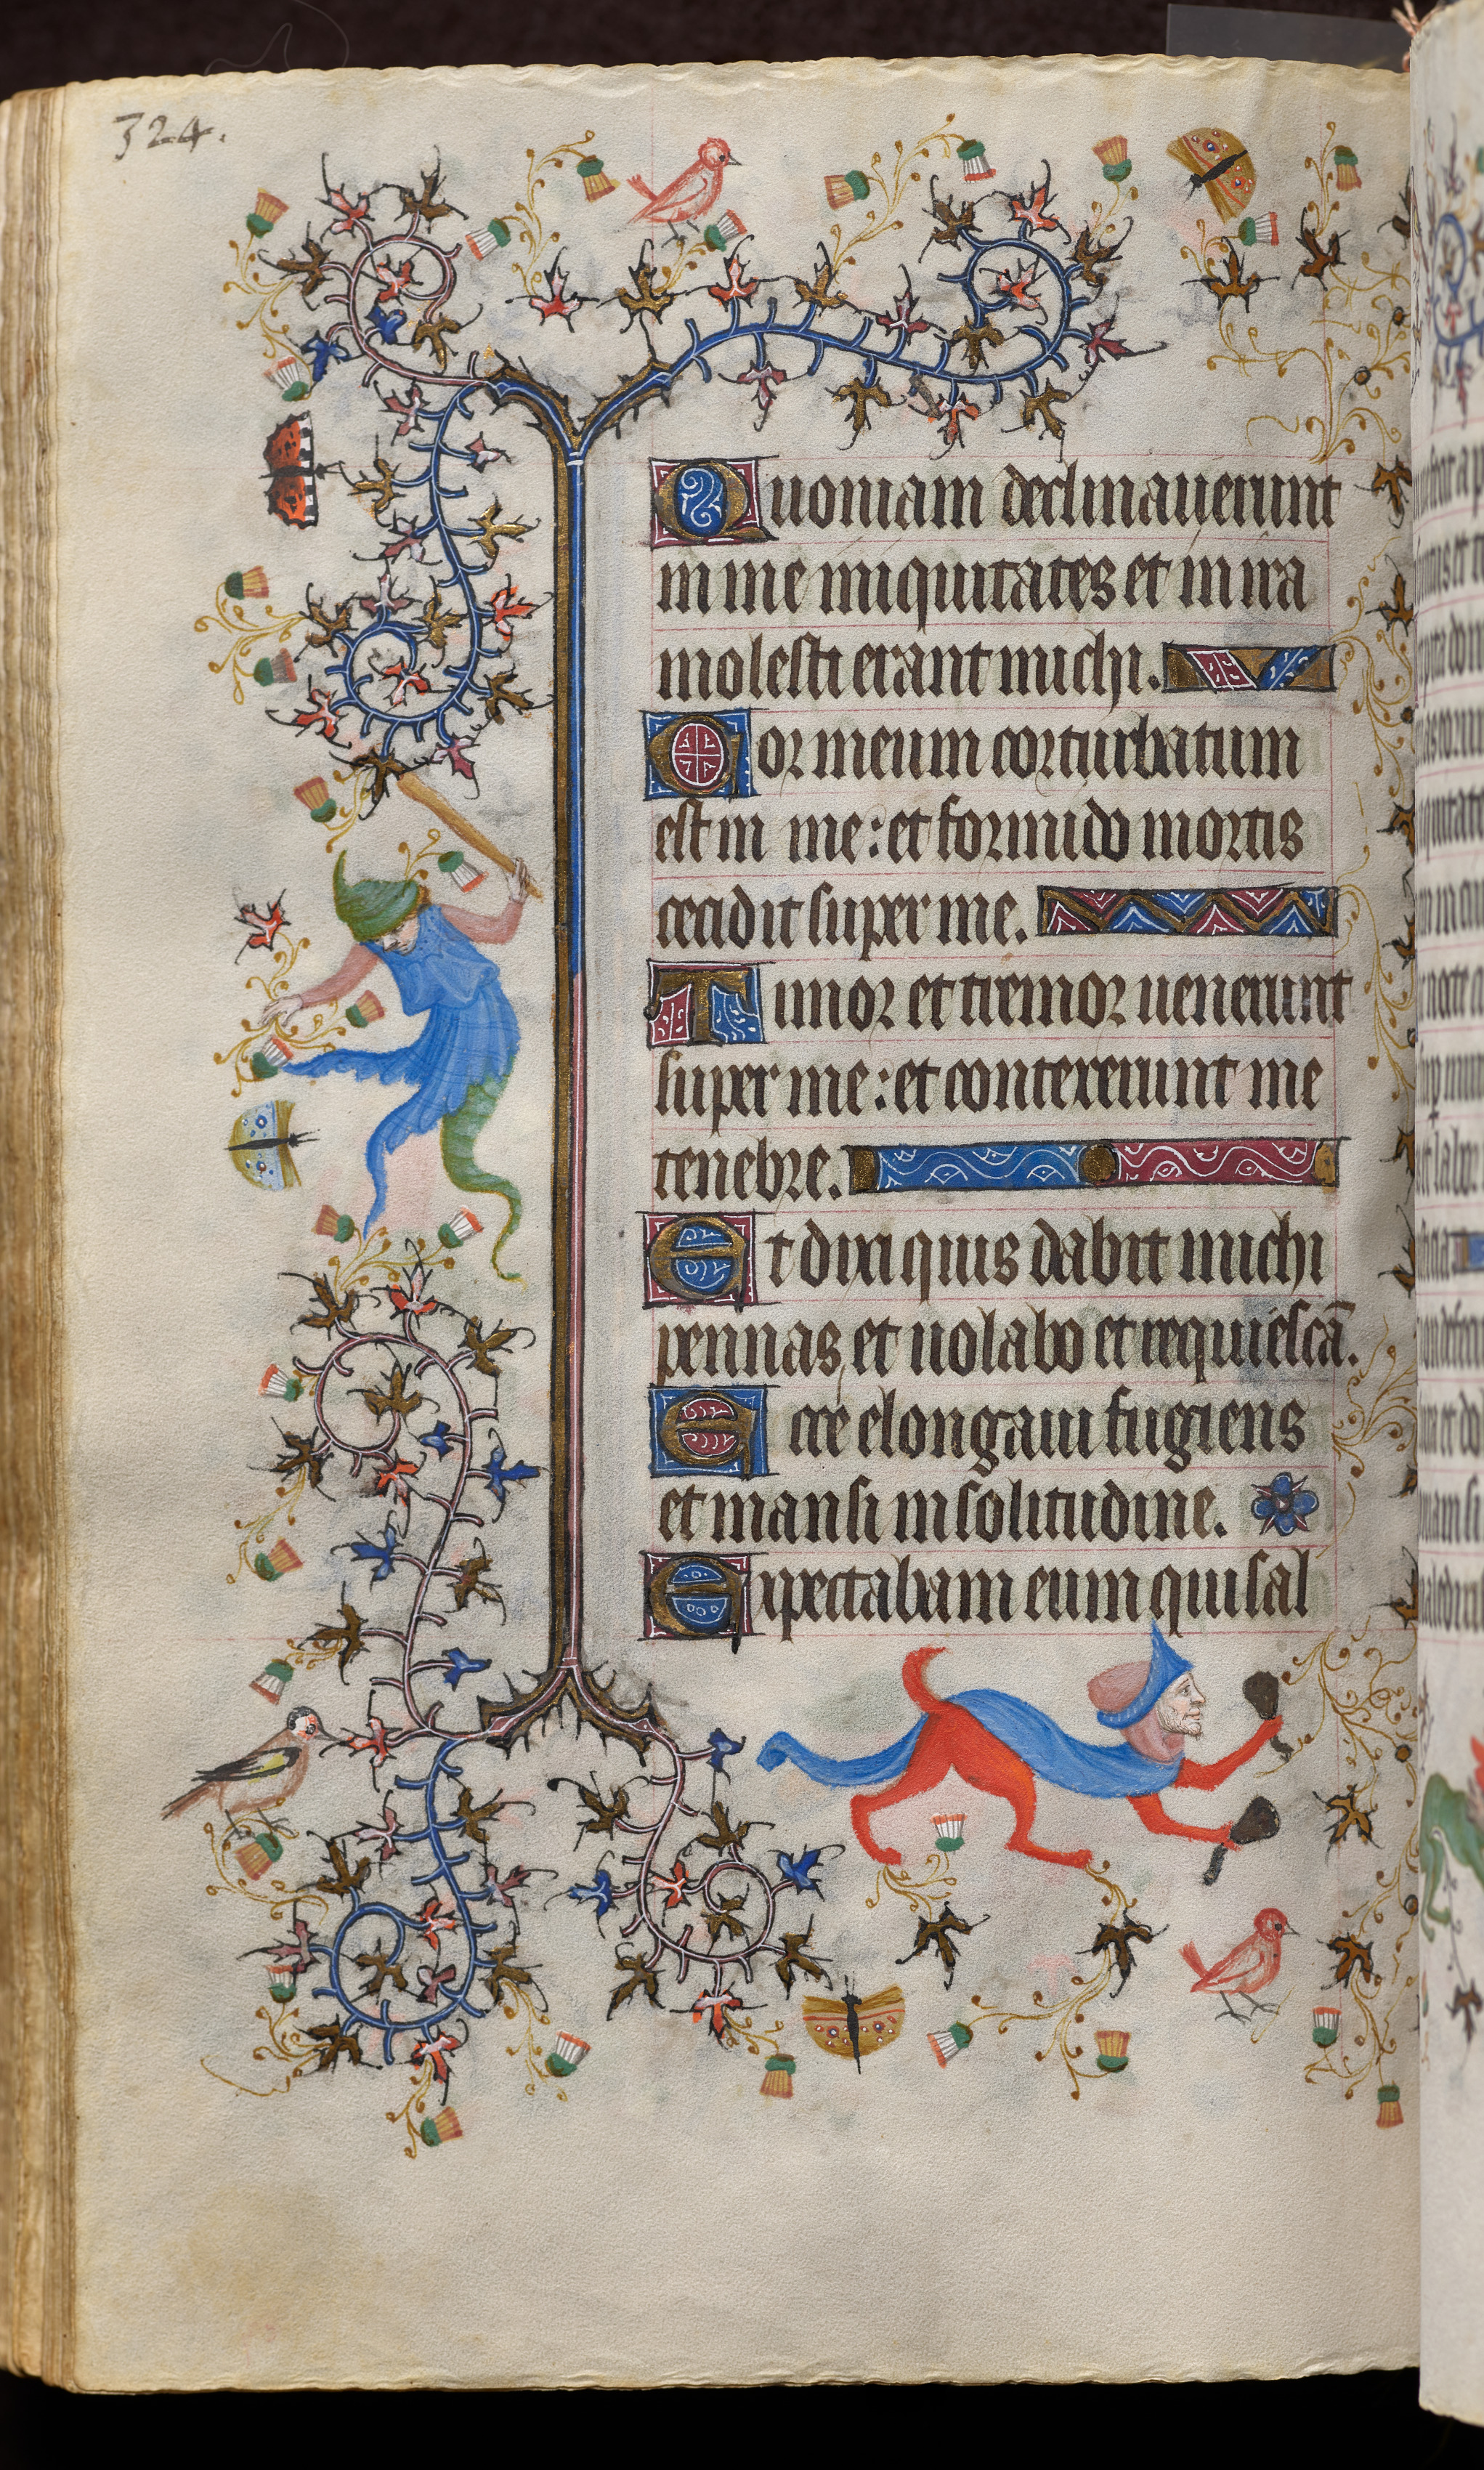 Hours of Charles the Noble, King of Navarre (1361-1425): fol. 162v, Text